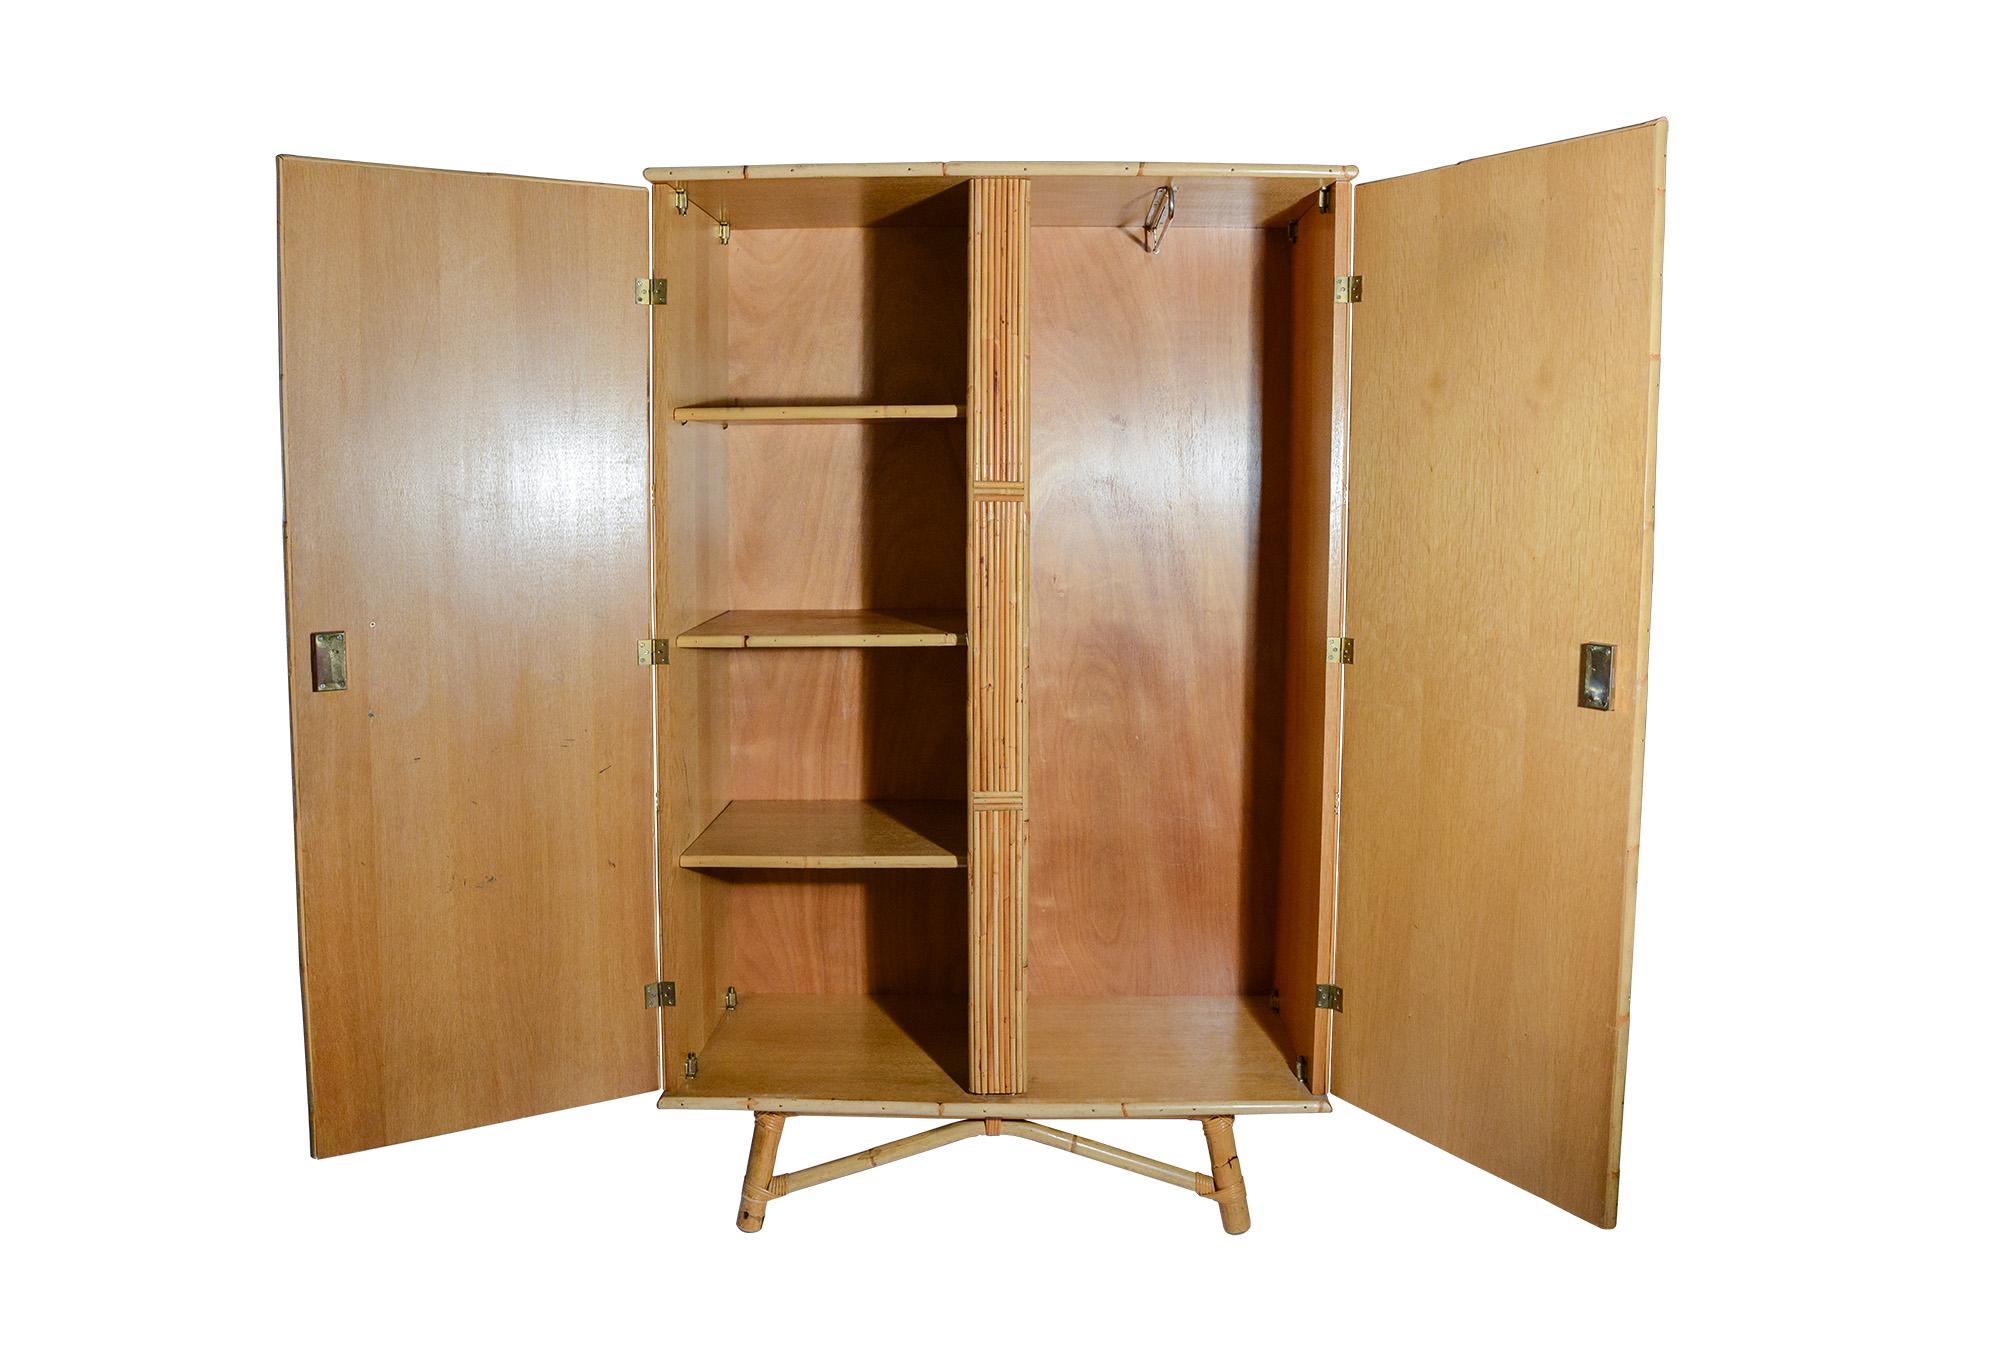 Audoux-Minet wardrobes, 
rattan and wood, 
circa 1965, France.
Measures: Height 1m76, width 110 cm, depth 50 cm.